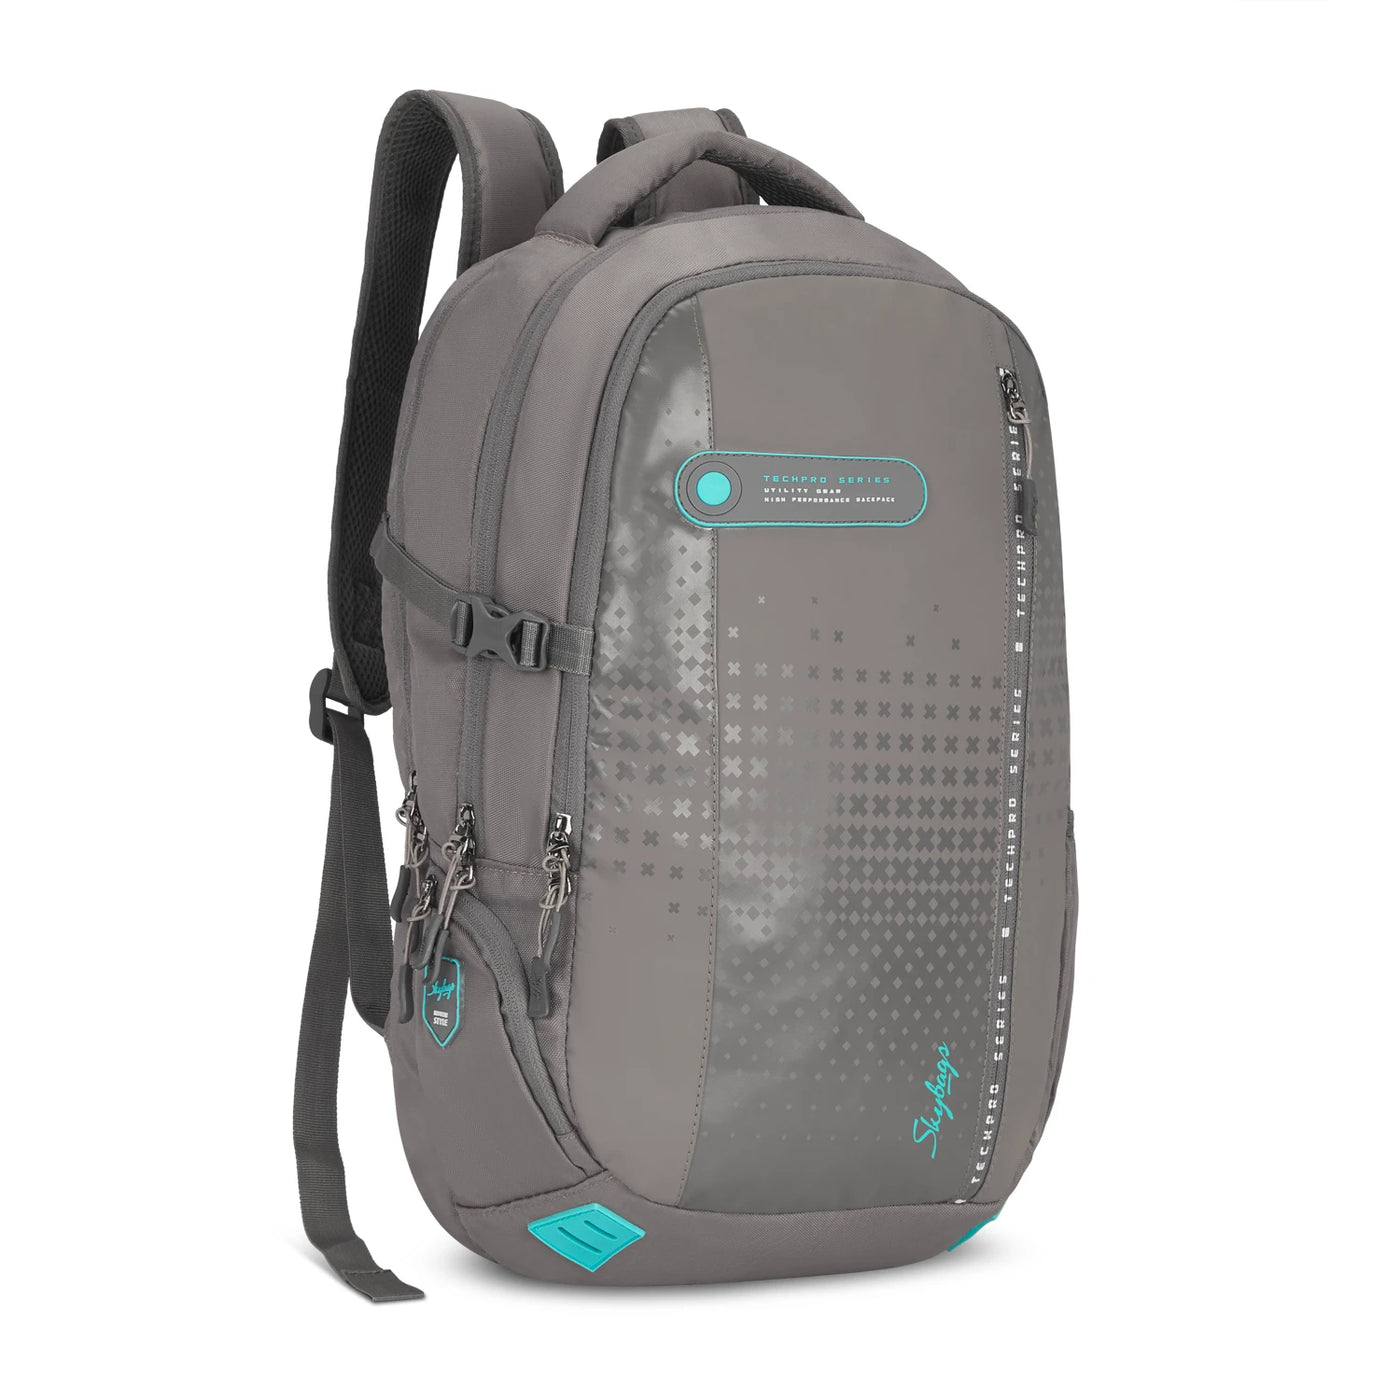 SKYBAGS VALOR PRO "04 LAPTOP BACKPACK GREY"